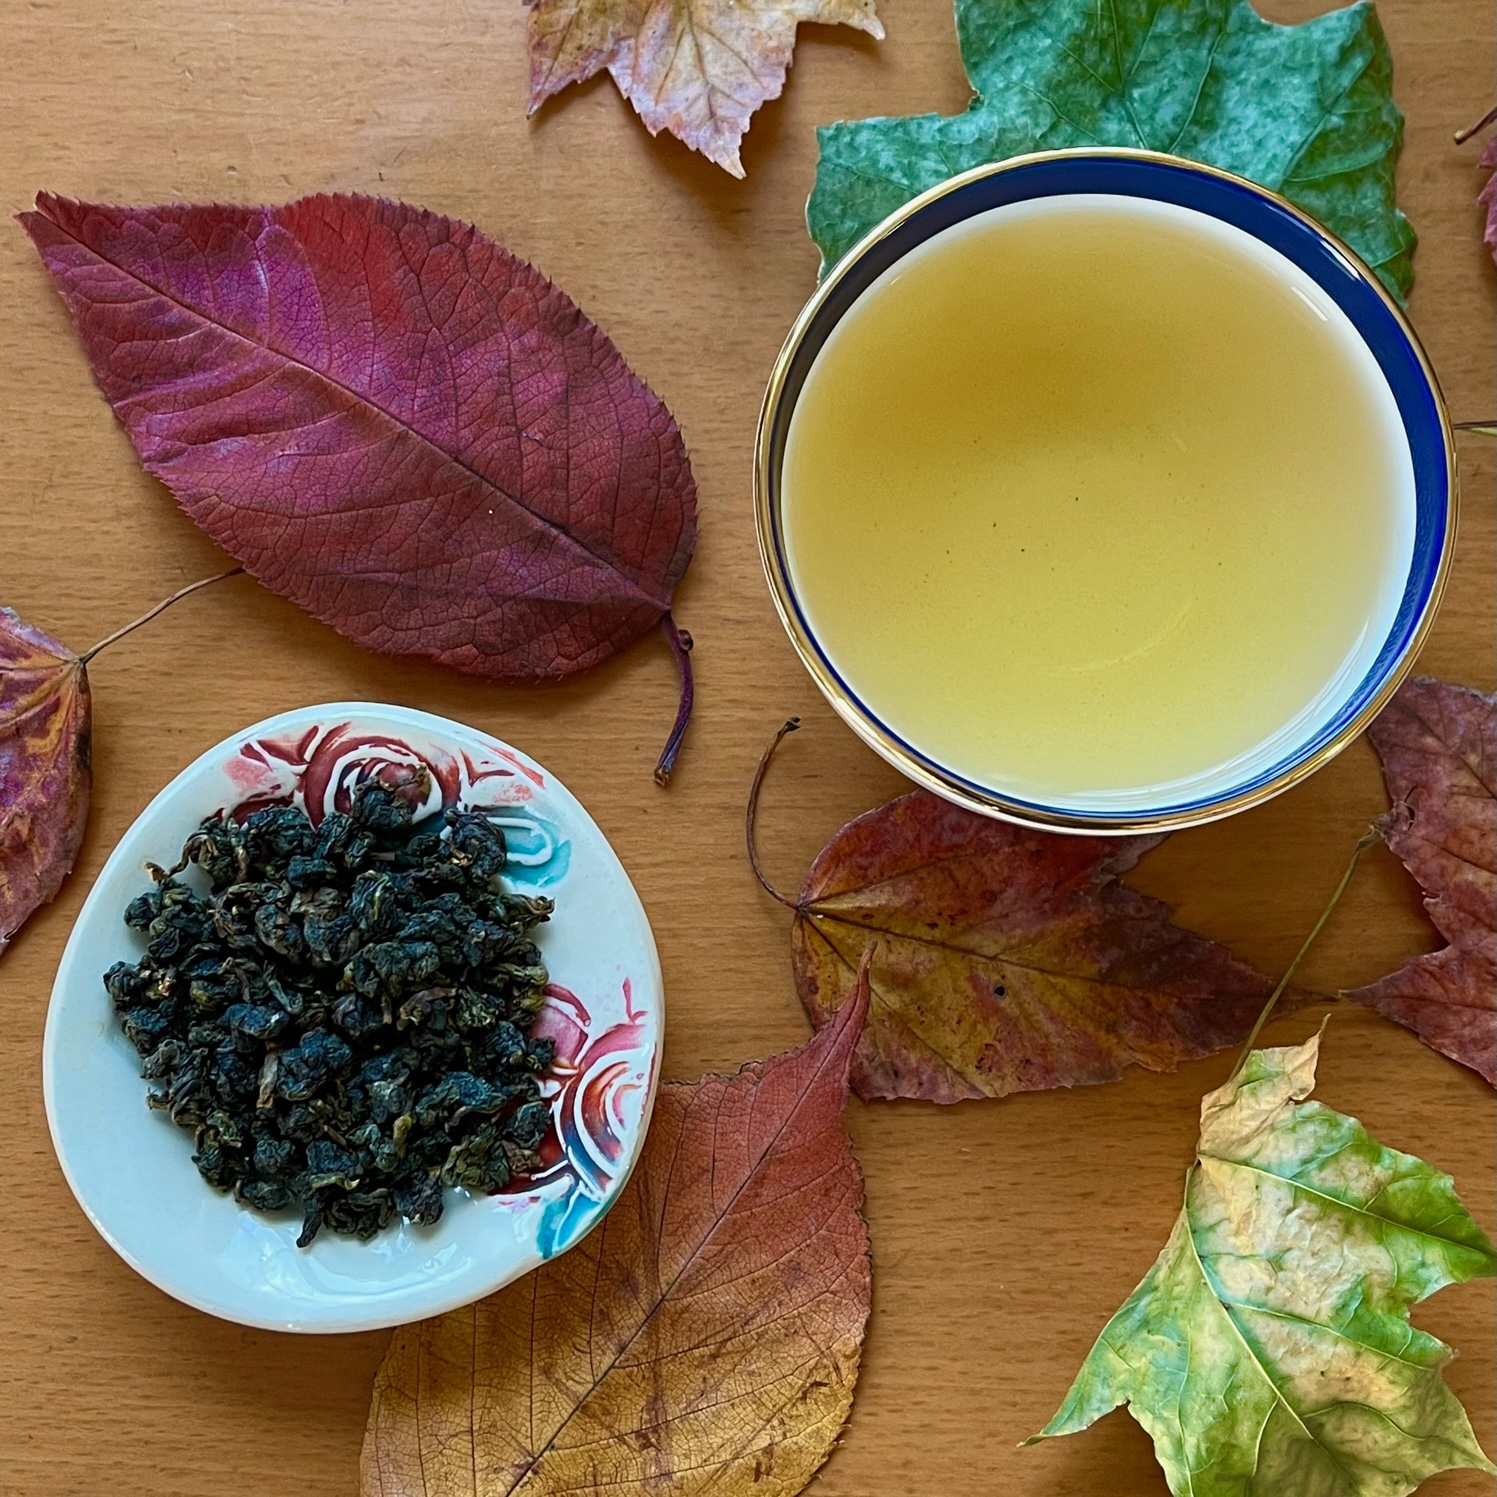 Dish of rolled Rice Oolong from Teawala--including tea leaves and "sticky rice herb" on a table with autumn leaves and a small cup of golden steeped Rice Oolong tea